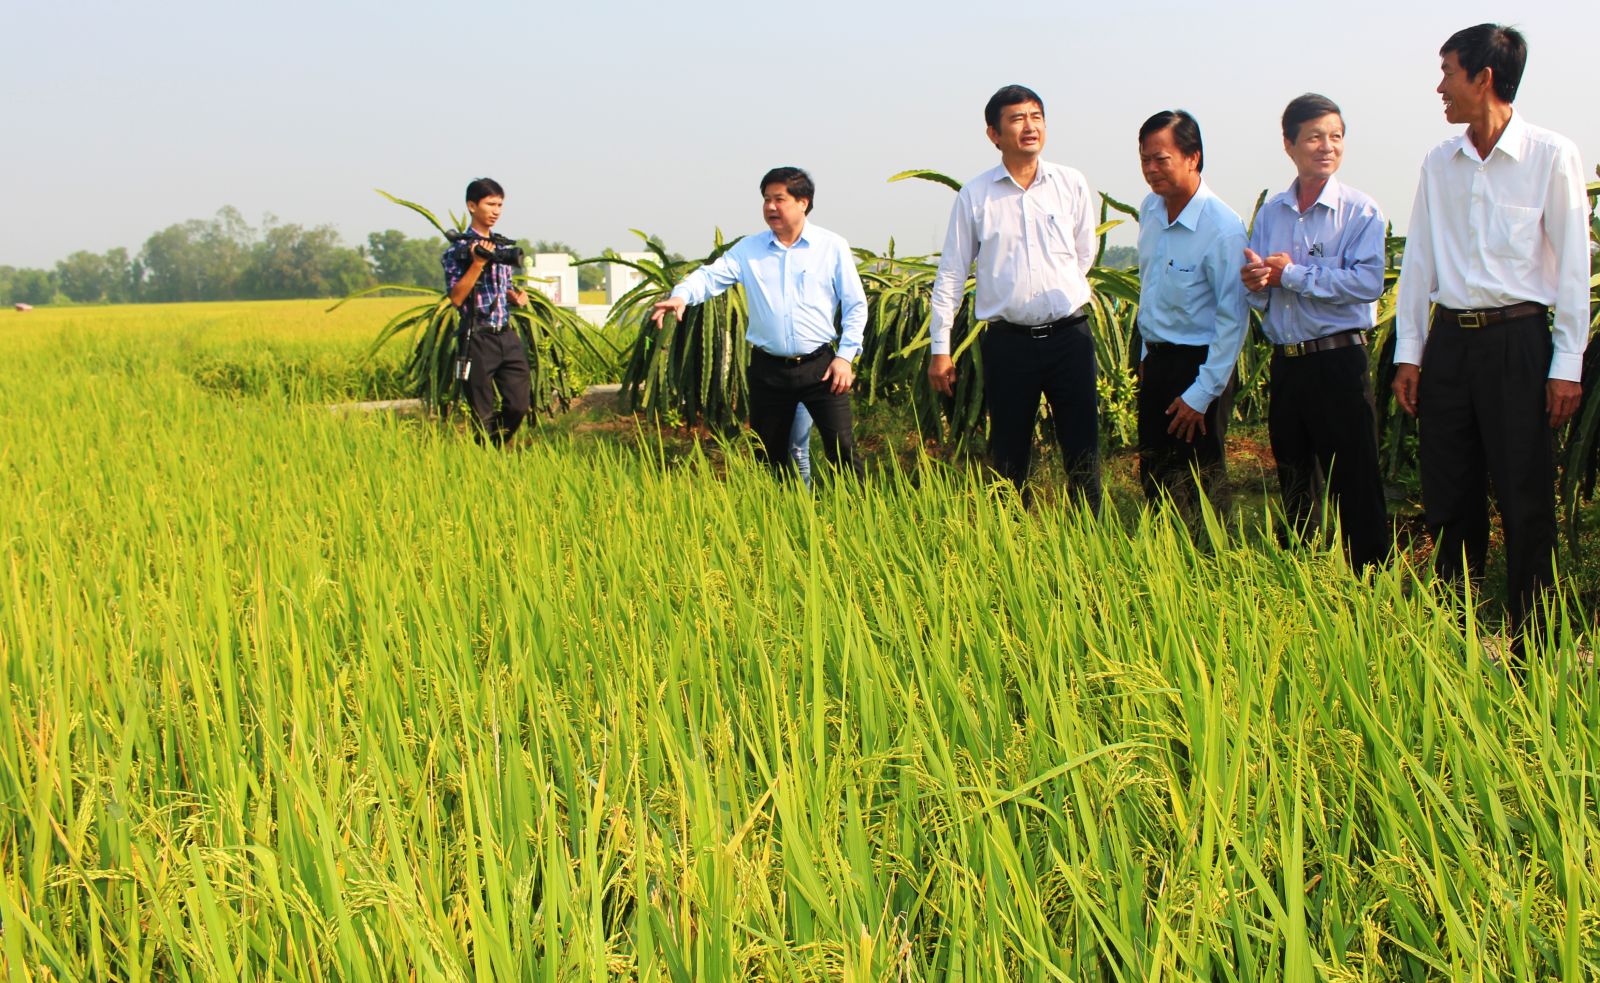 According to Deputy Minister of Agriculture and Rural Development - Le Quoc Doanh, the Winter-Spring rice crop 2019-2020 escapes from the effects of drought and salinity intrusion